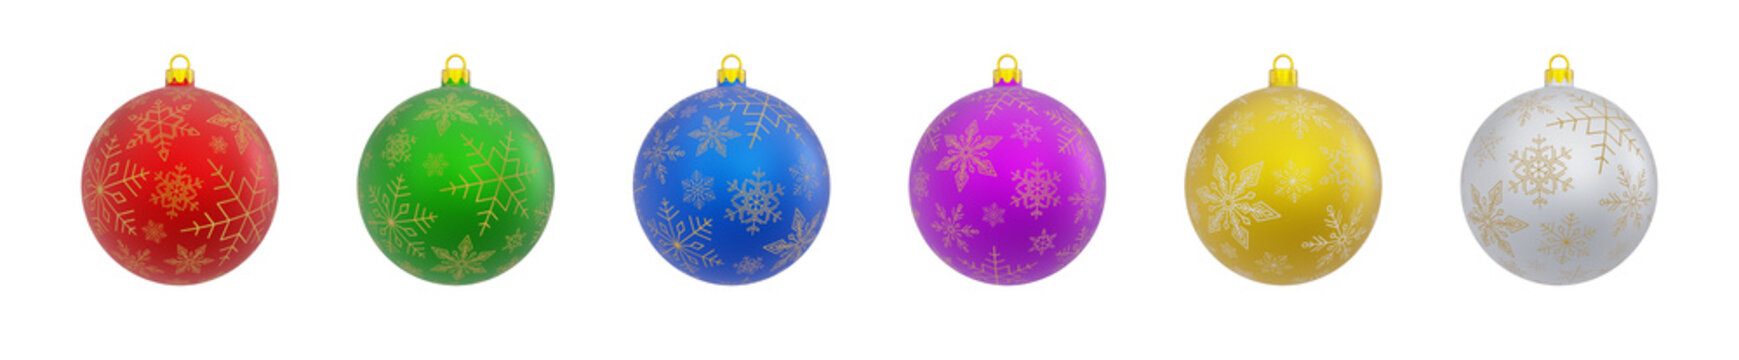 Christmas balls with snowflakes and a beautiful frosted finish in a wide variety of colors. Christmas ornaments pack. Realistic rendering.